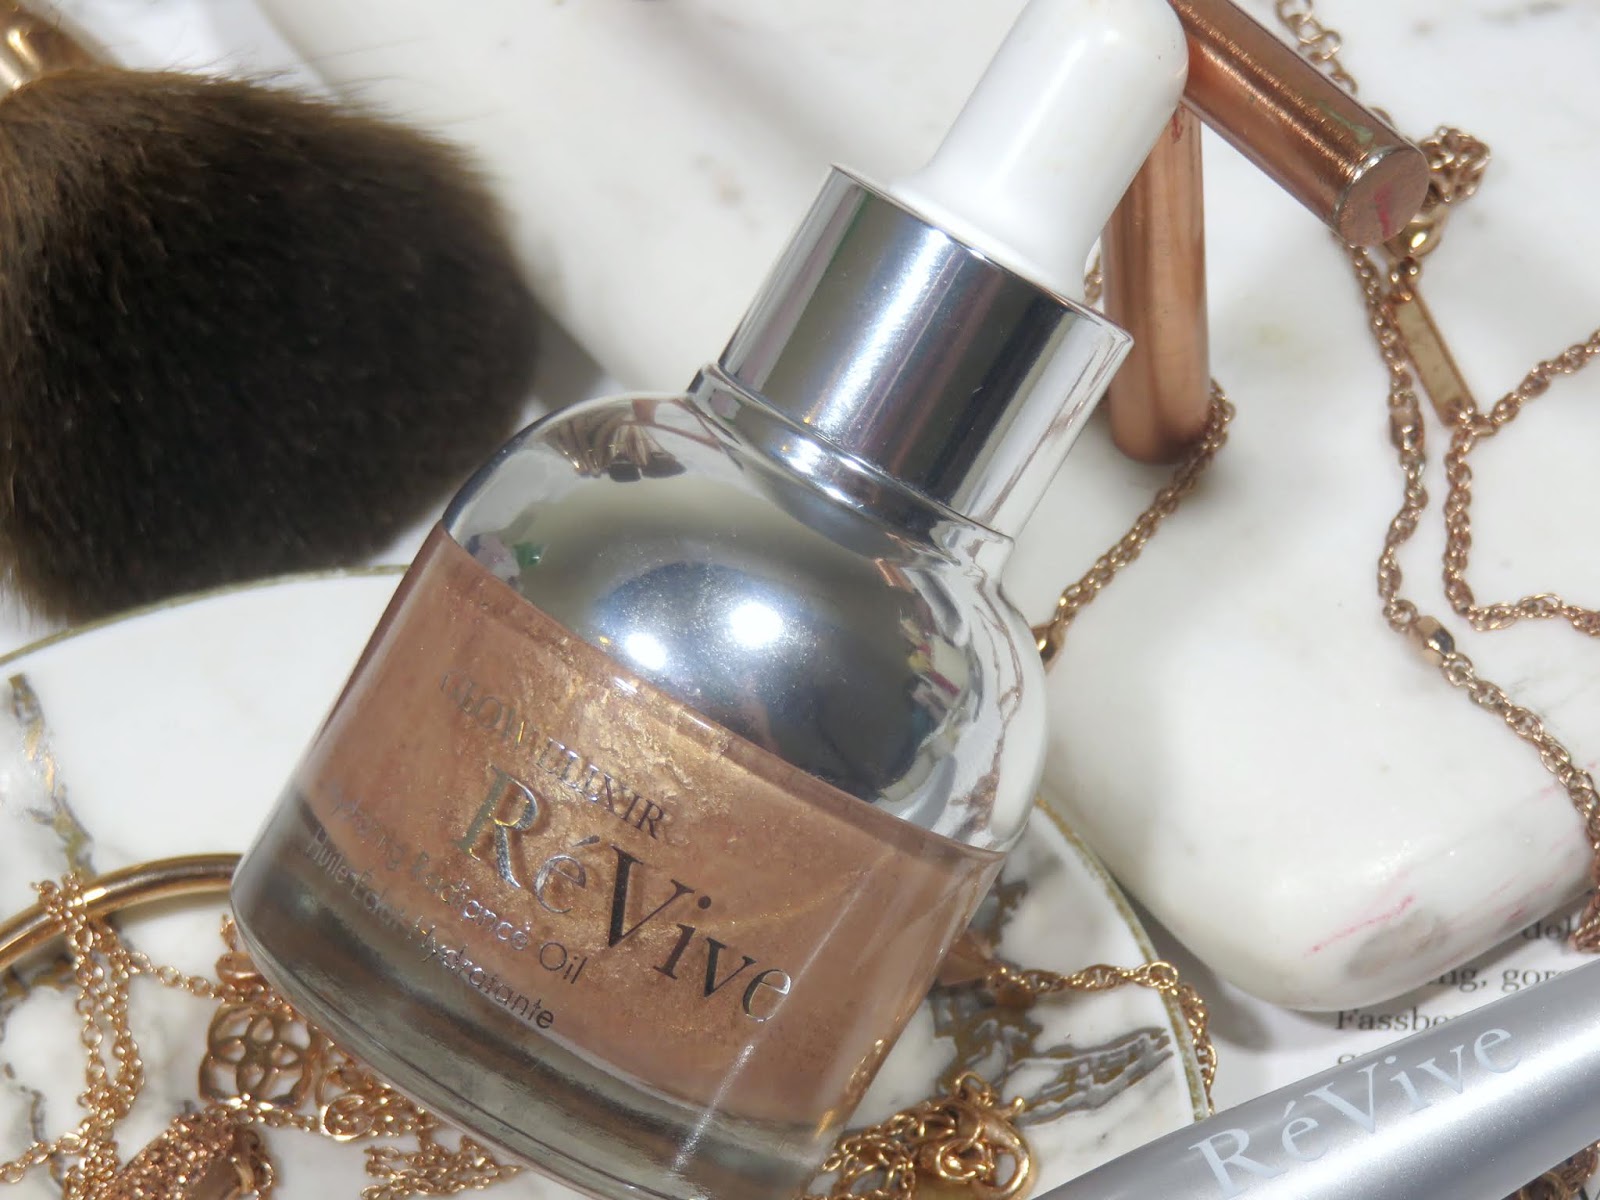 ReVive Glow Elixir Hydrating Radiance Oil 